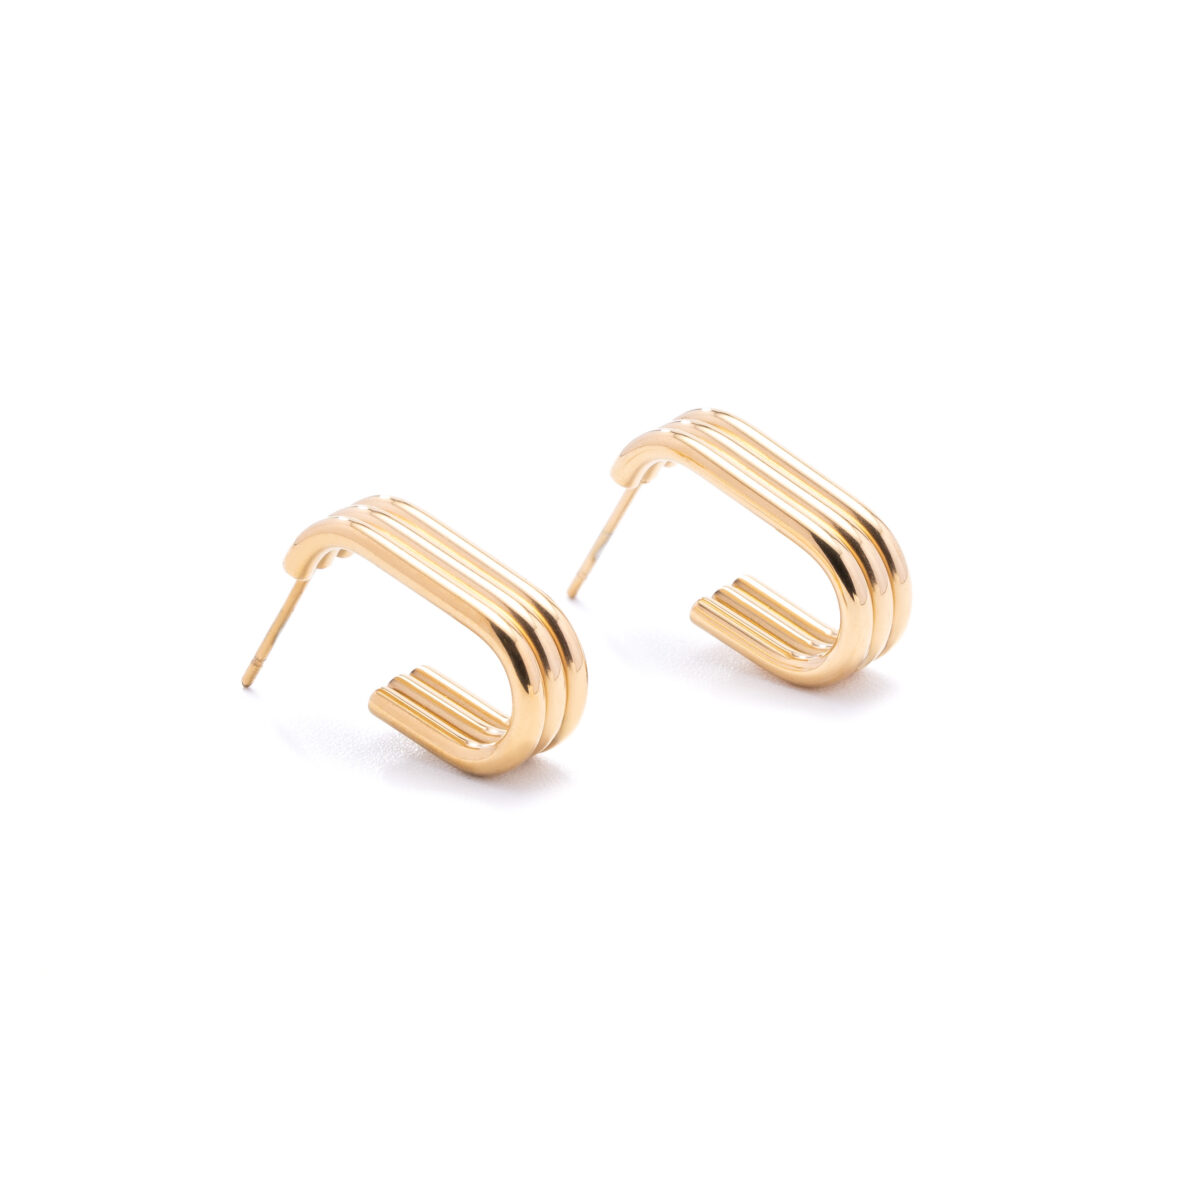 https://m.clubbella.co/product/new-york-essential-earrings/ pro-16